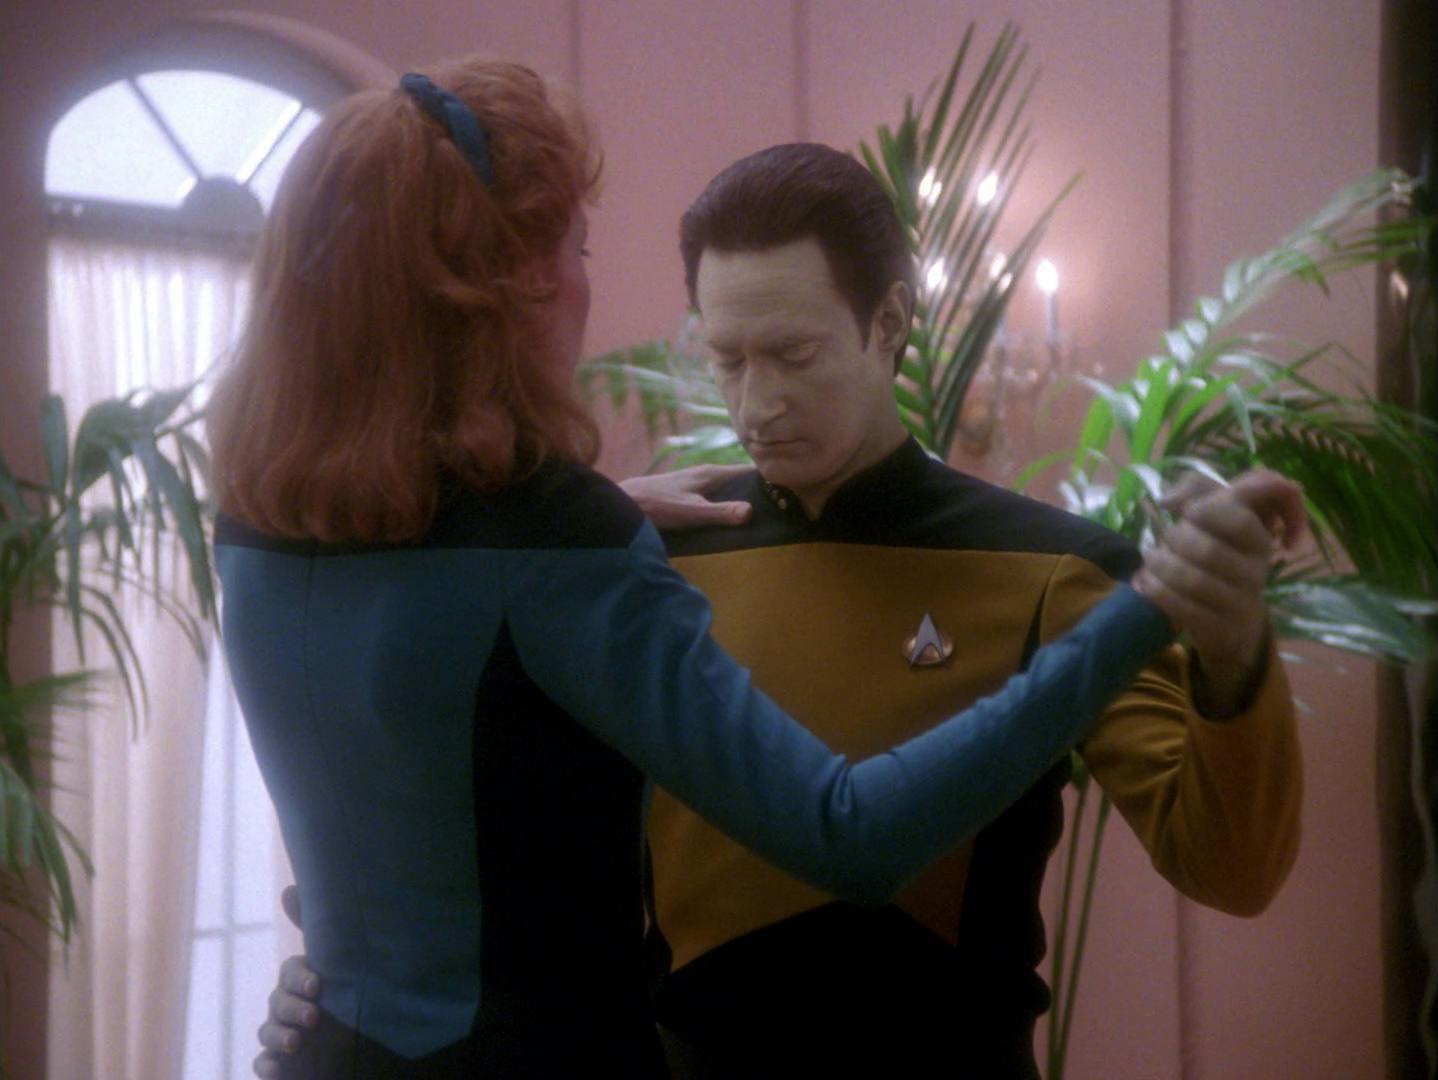 Beverly Crusher teaches Data how to dance the waltz in 'Data's Day'